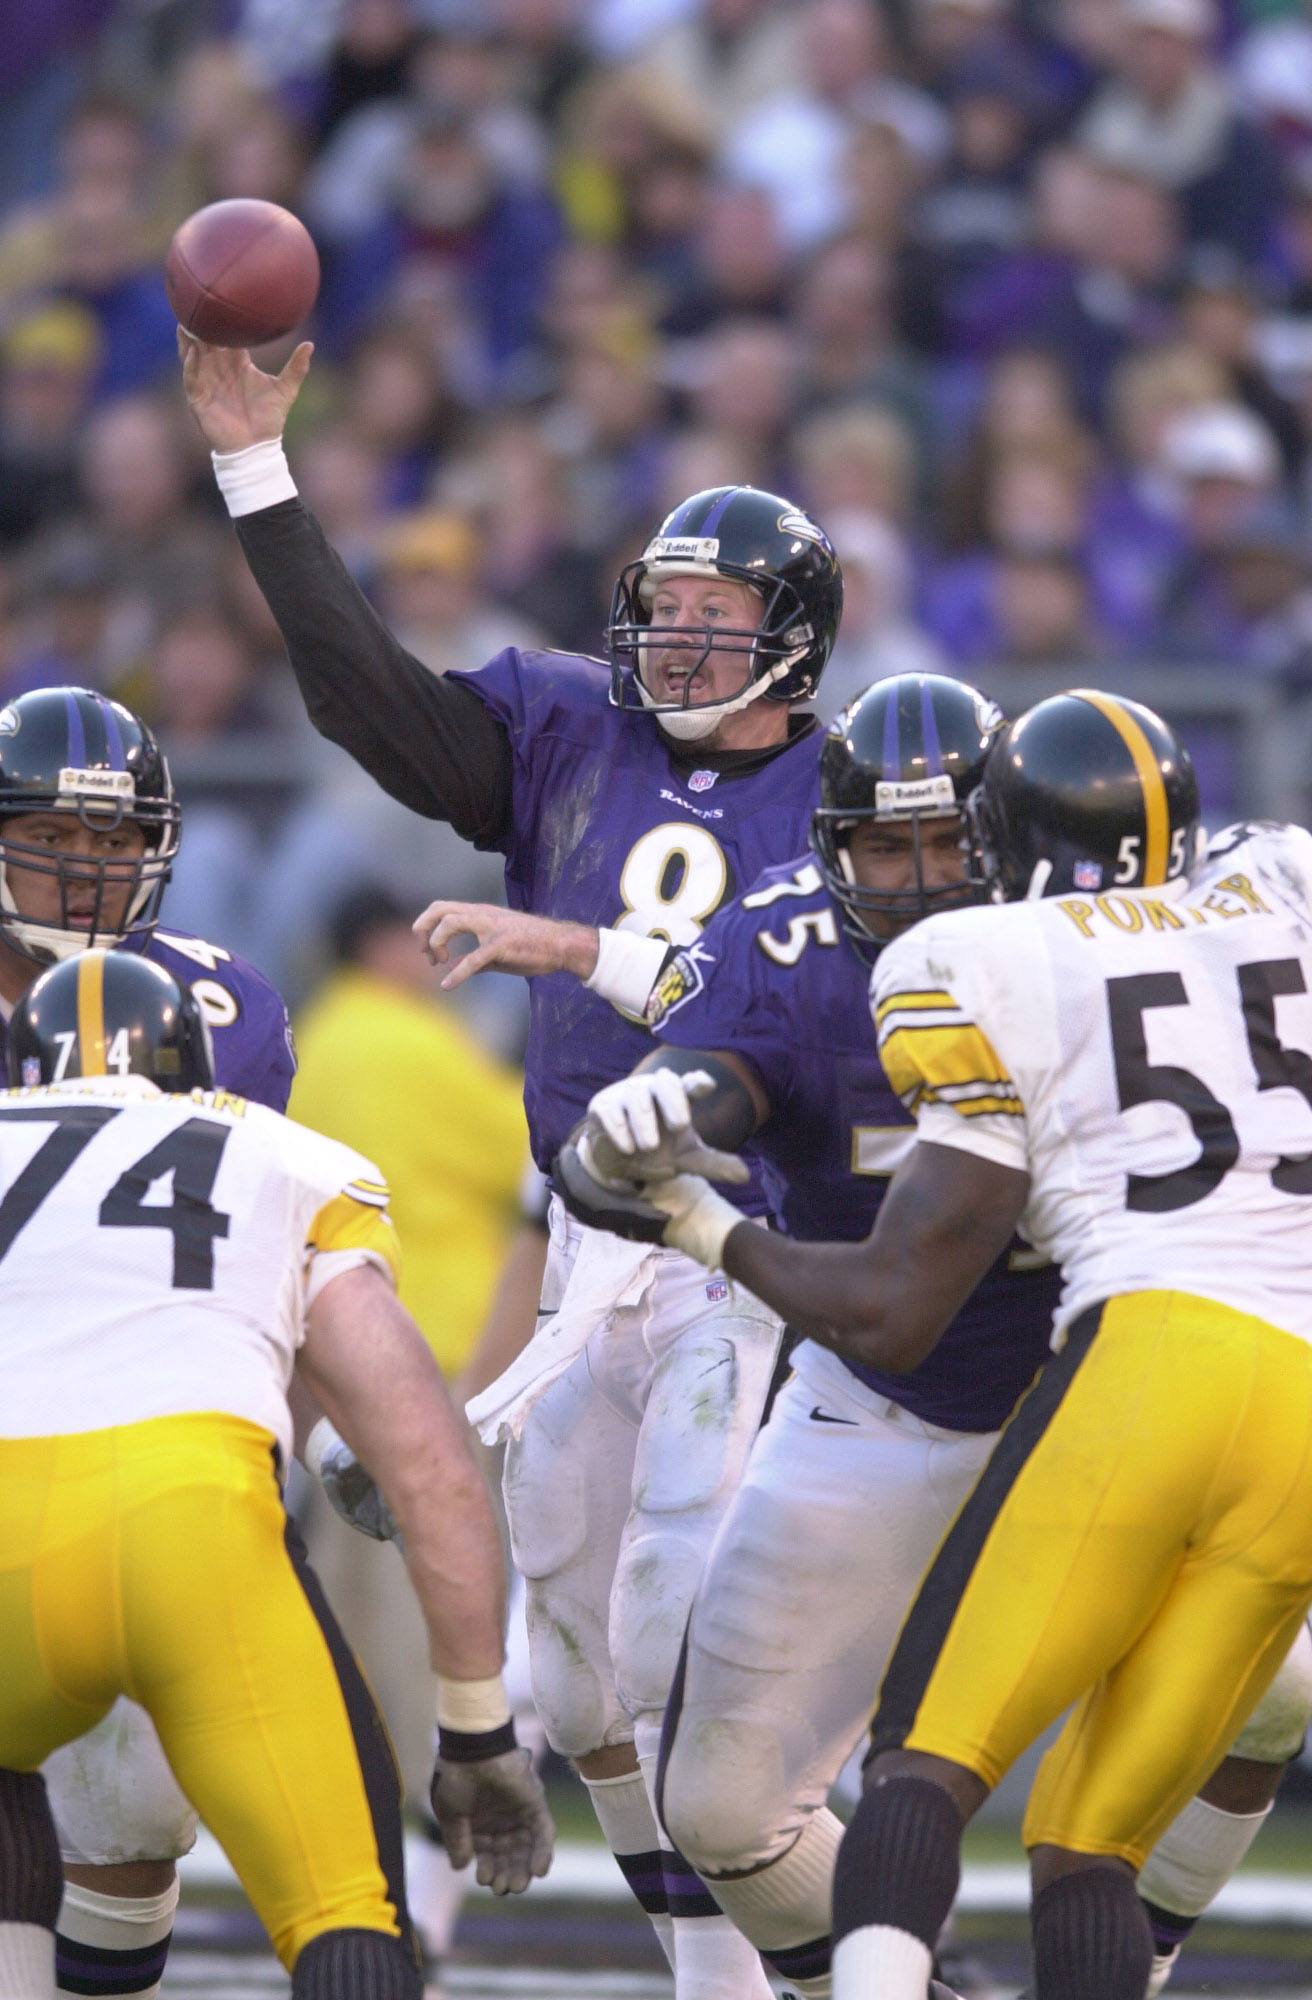 Flashback Friday: Fluke play leads Ravens to win over Giants in 1997